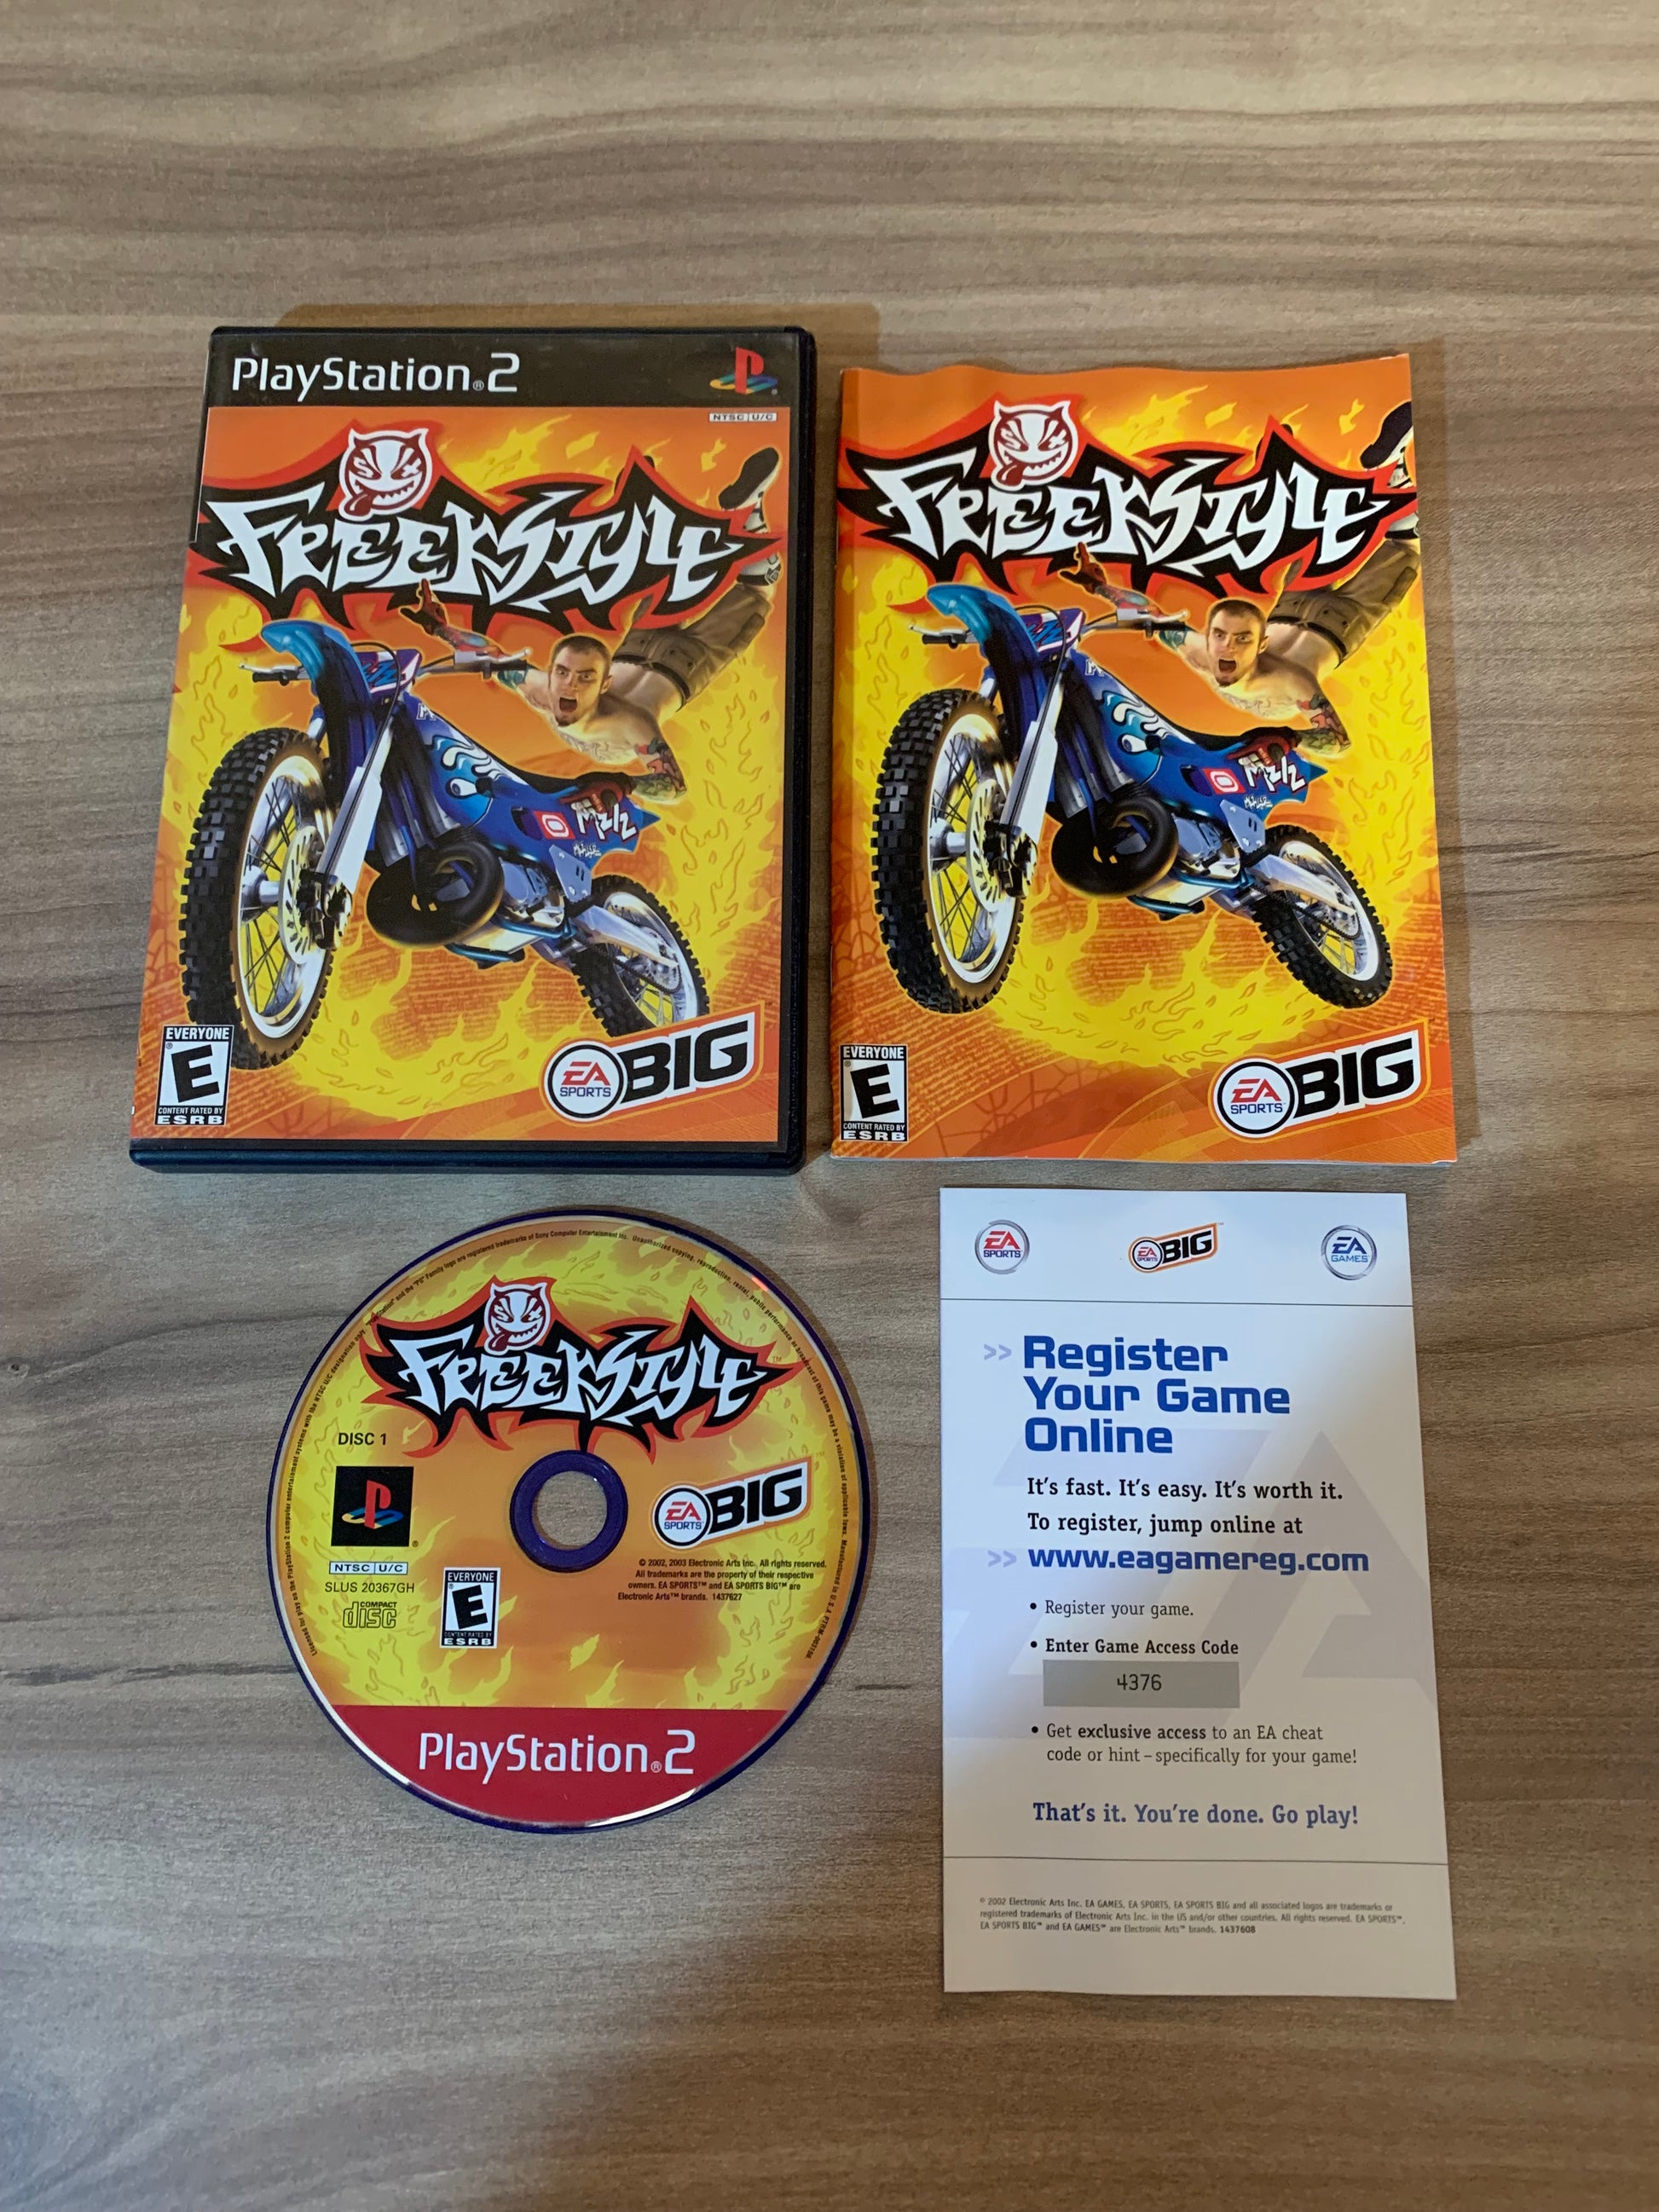 PiXEL-RETRO.COM : SONY PLAYSTATION 2 (PS2) COMPLET CIB BOX MANUAL GAME NTSC FREESTYLE